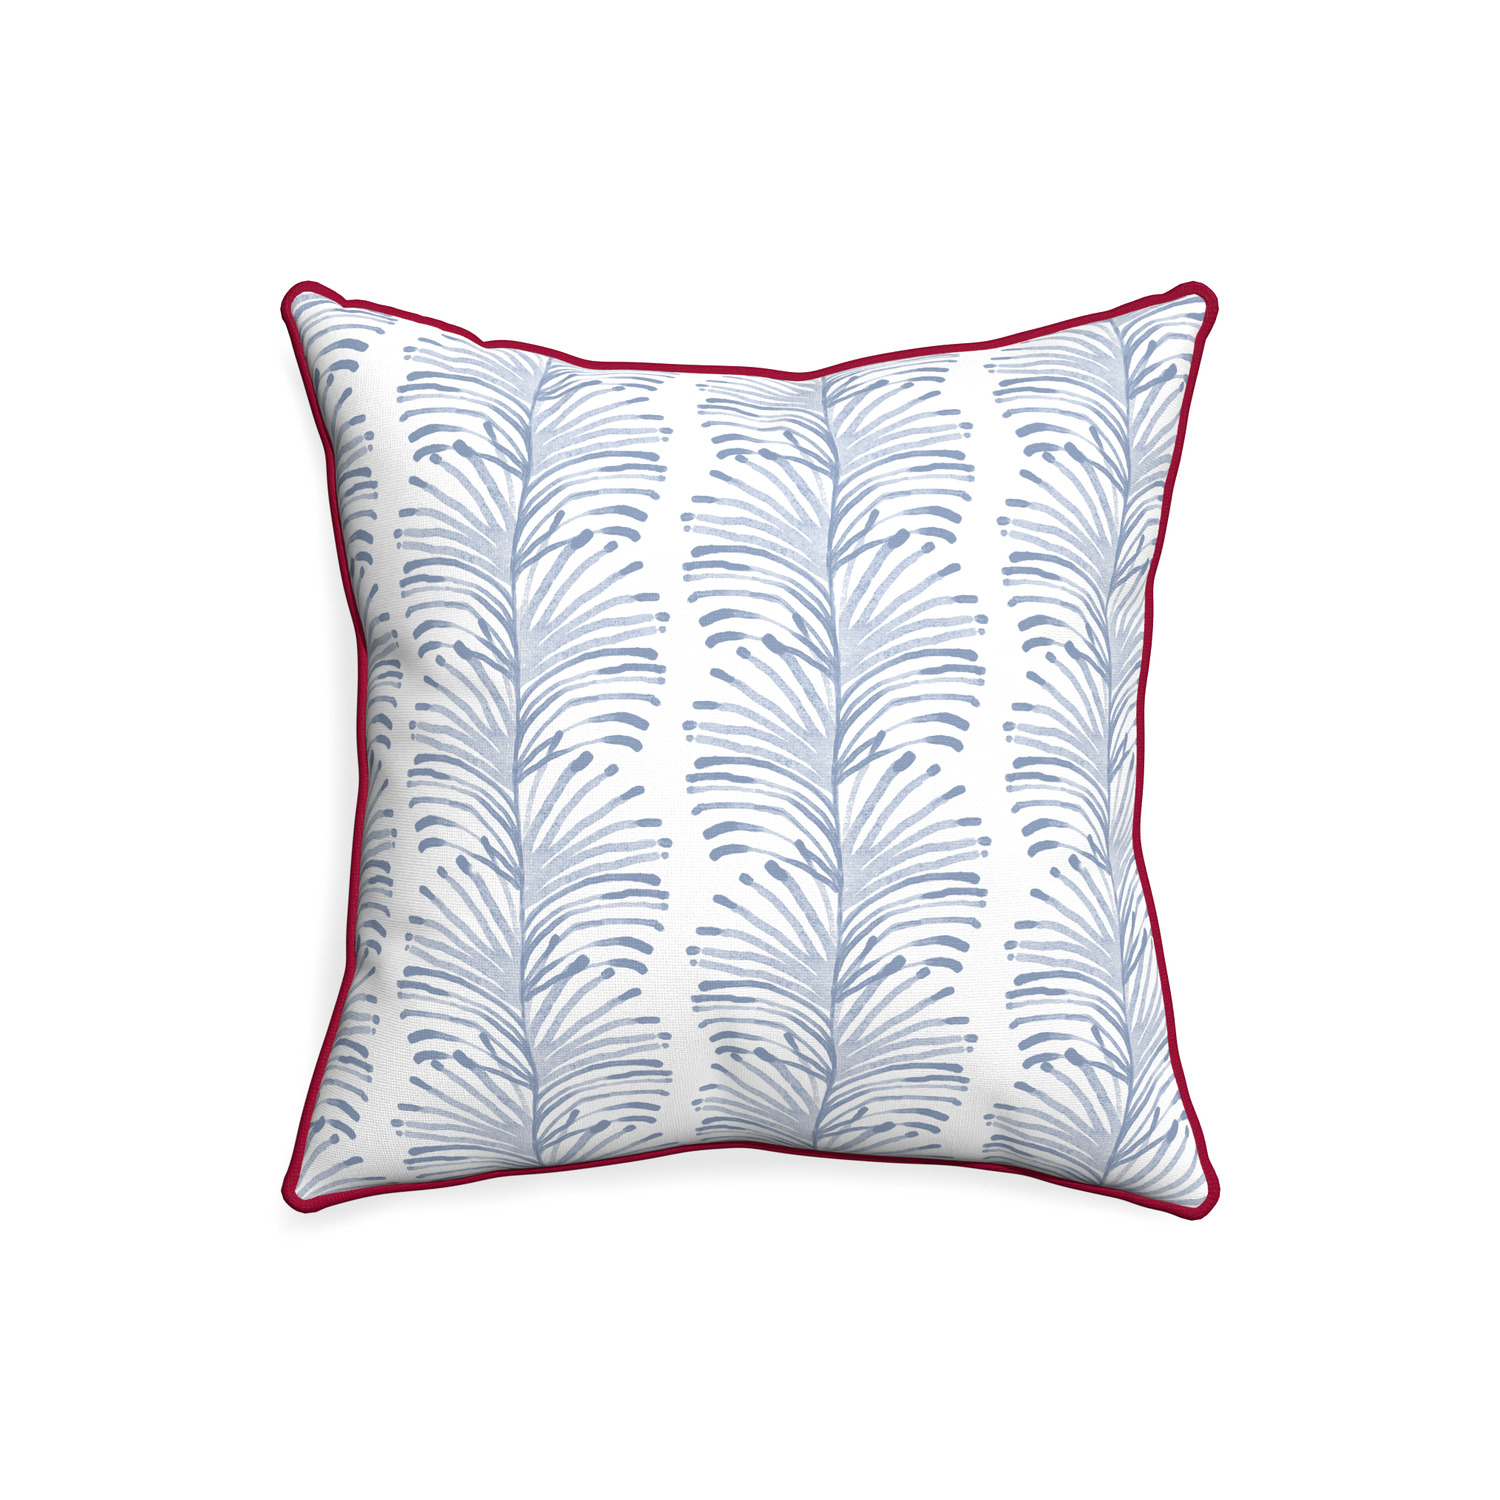 20-square emma sky custom pillow with raspberry piping on white background